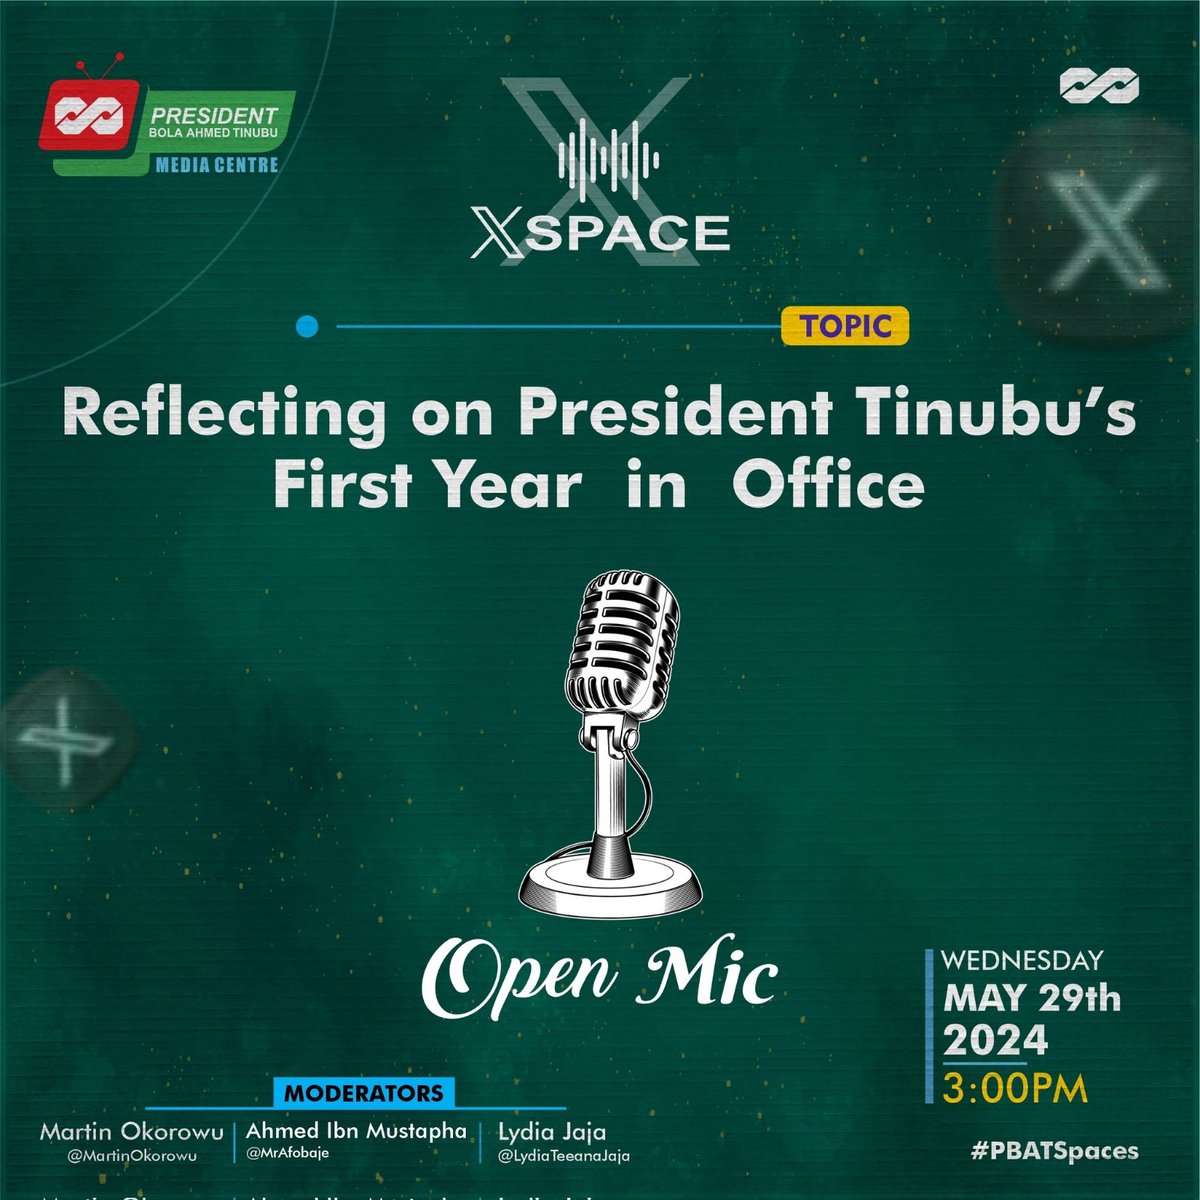 Tune in by 3pm tomorrow to join PBAT Media Center special edition of #PBATSpaces to mark the first anniversary of President Bola Ahmed Tinubu in office. Theme: 'Reflecting on President Tinubu's First Year in Office.' Hosts: @MrAfobaje @LydiaTeeanaJaja @martinokorowu